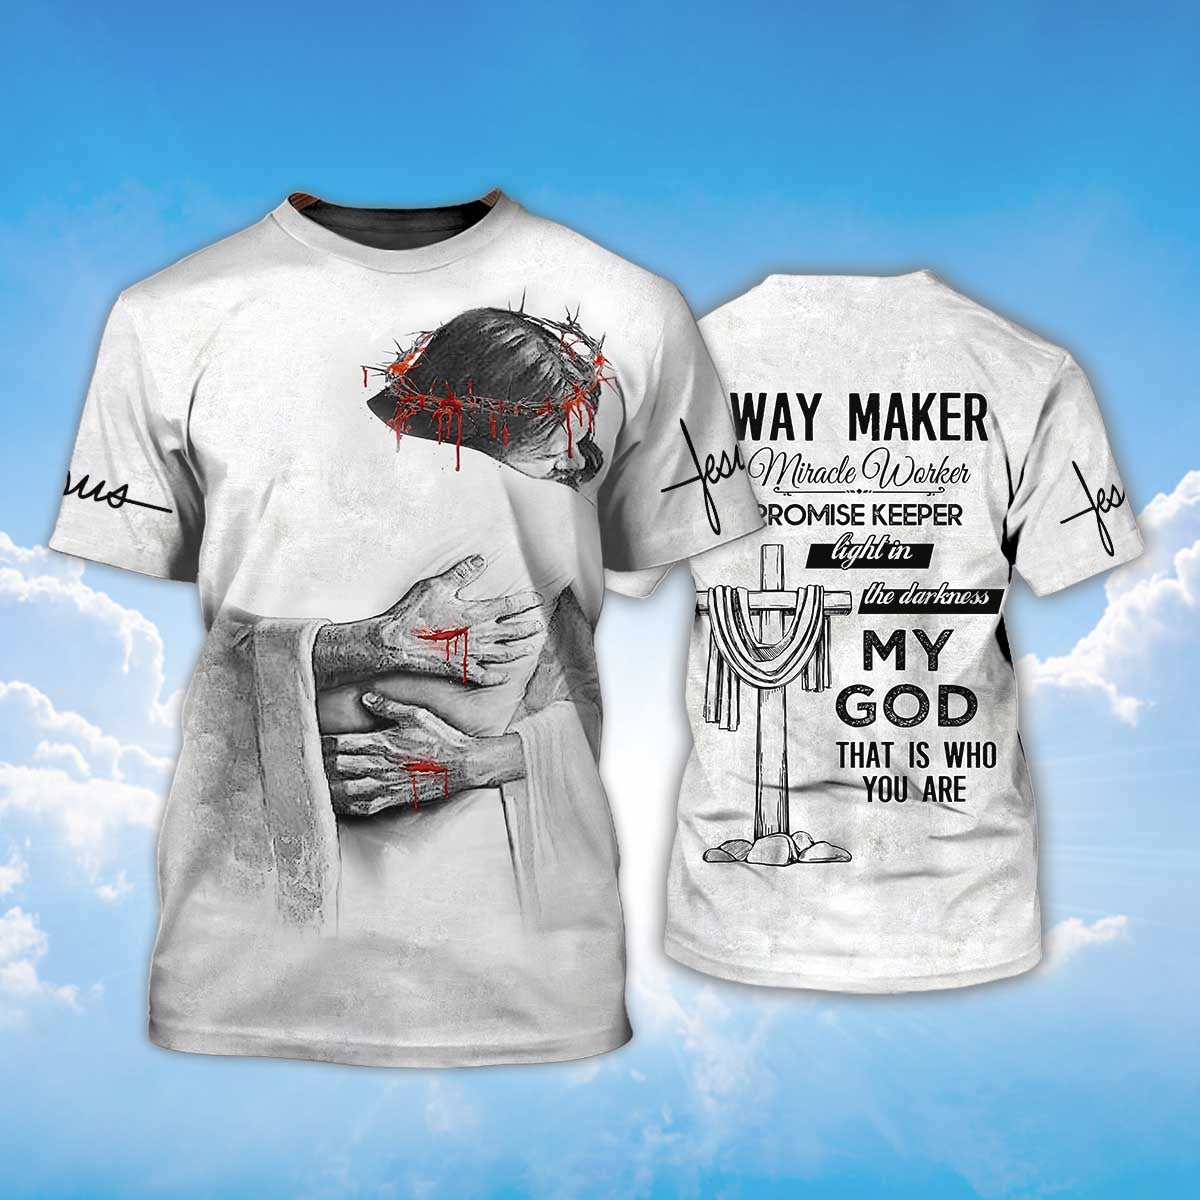 Way Maker Miracle Worker Promise Keeper Light In The Darkness T Shirt